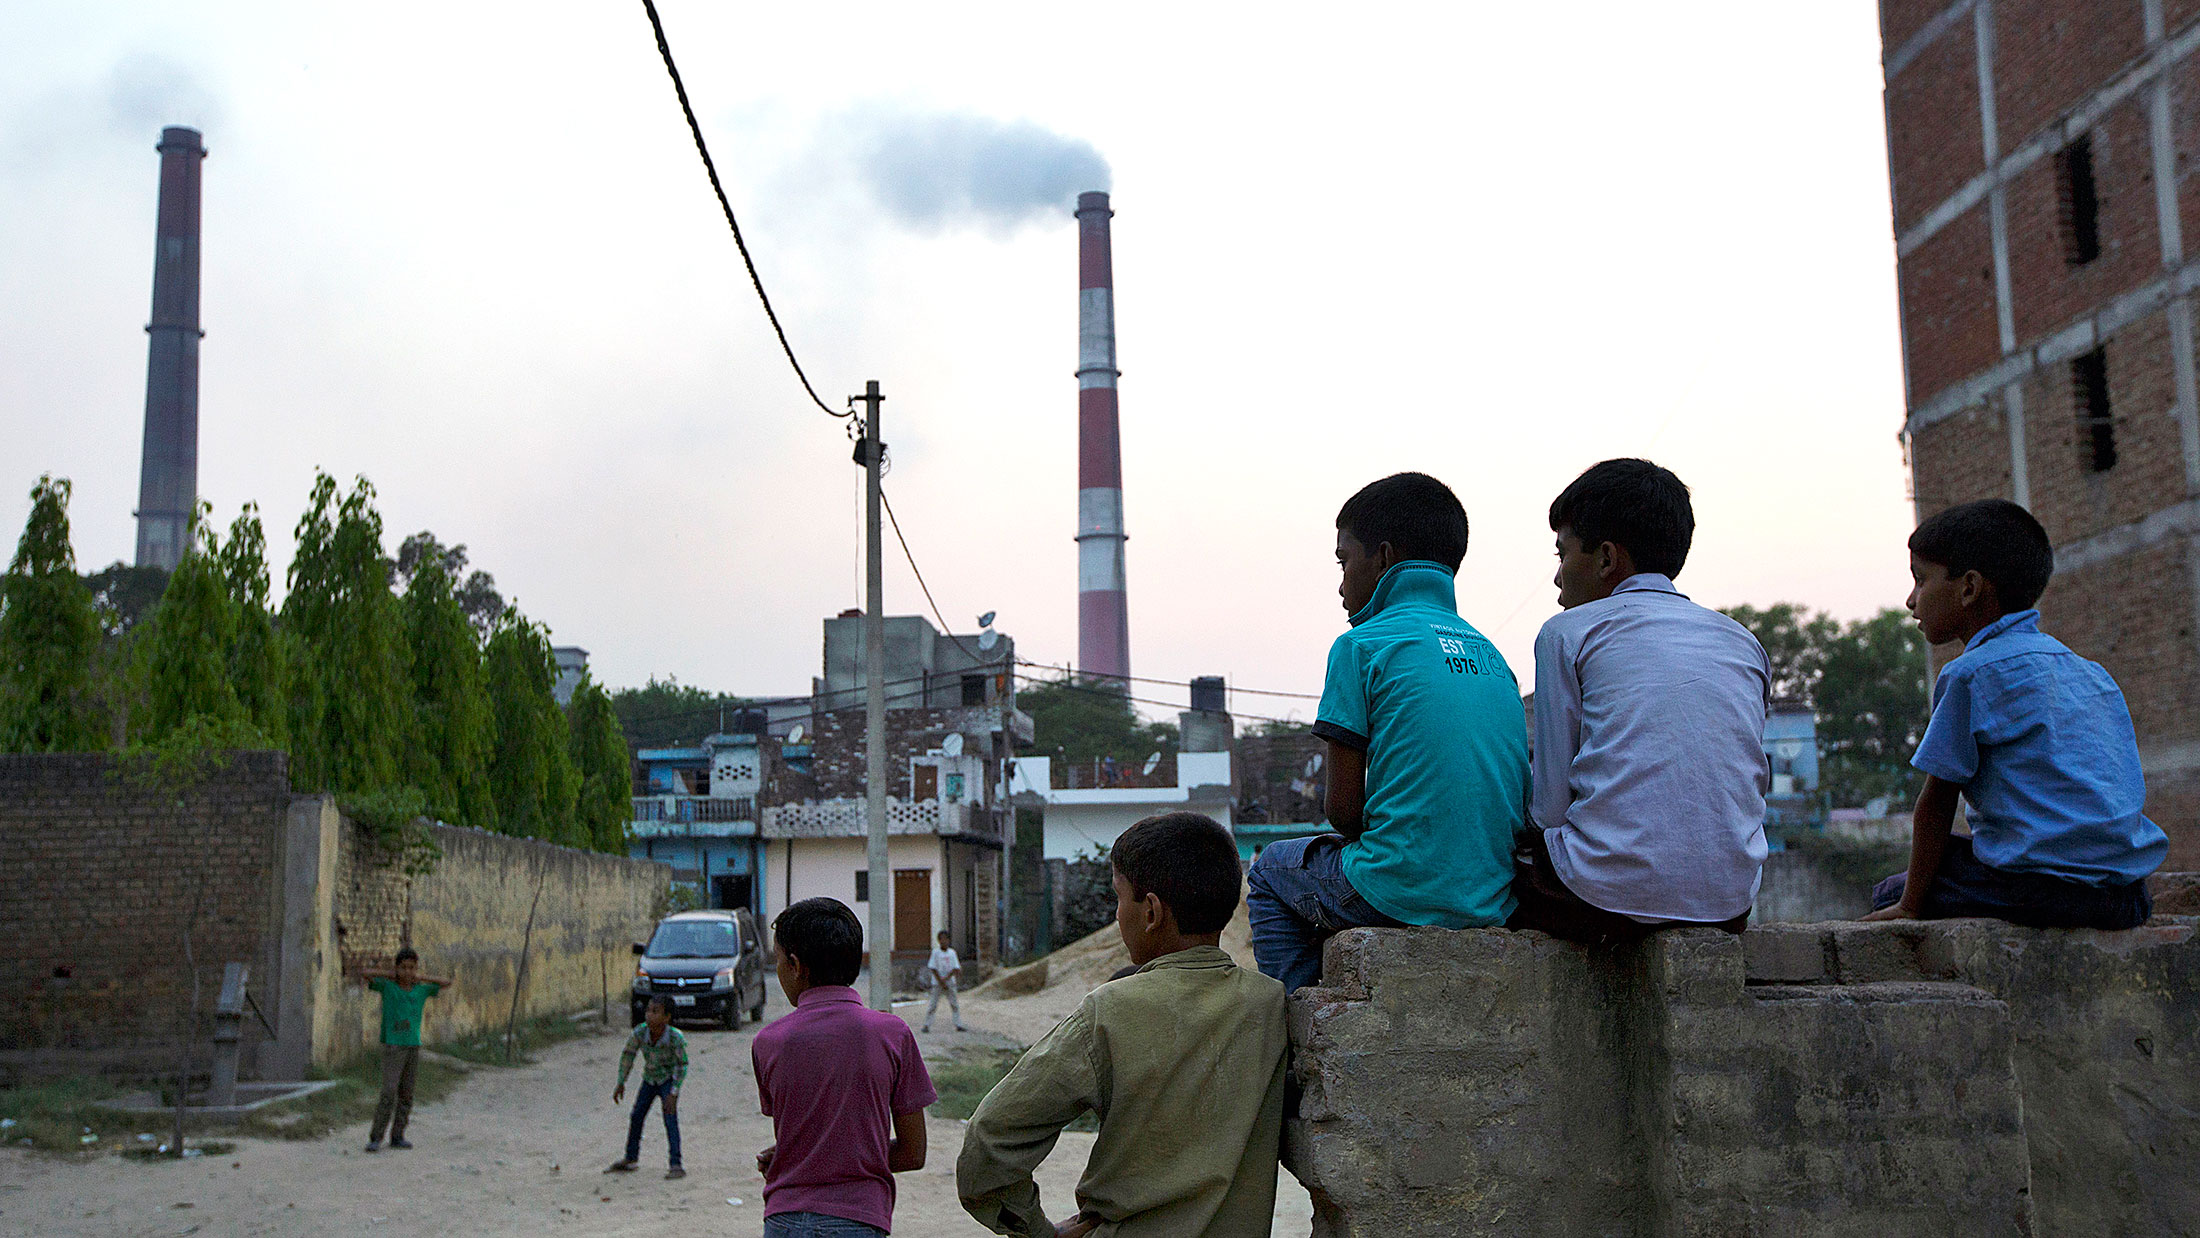 Emissions billow from smokestacks at a coal-fired power plant near residential property in Badarpur, India.
